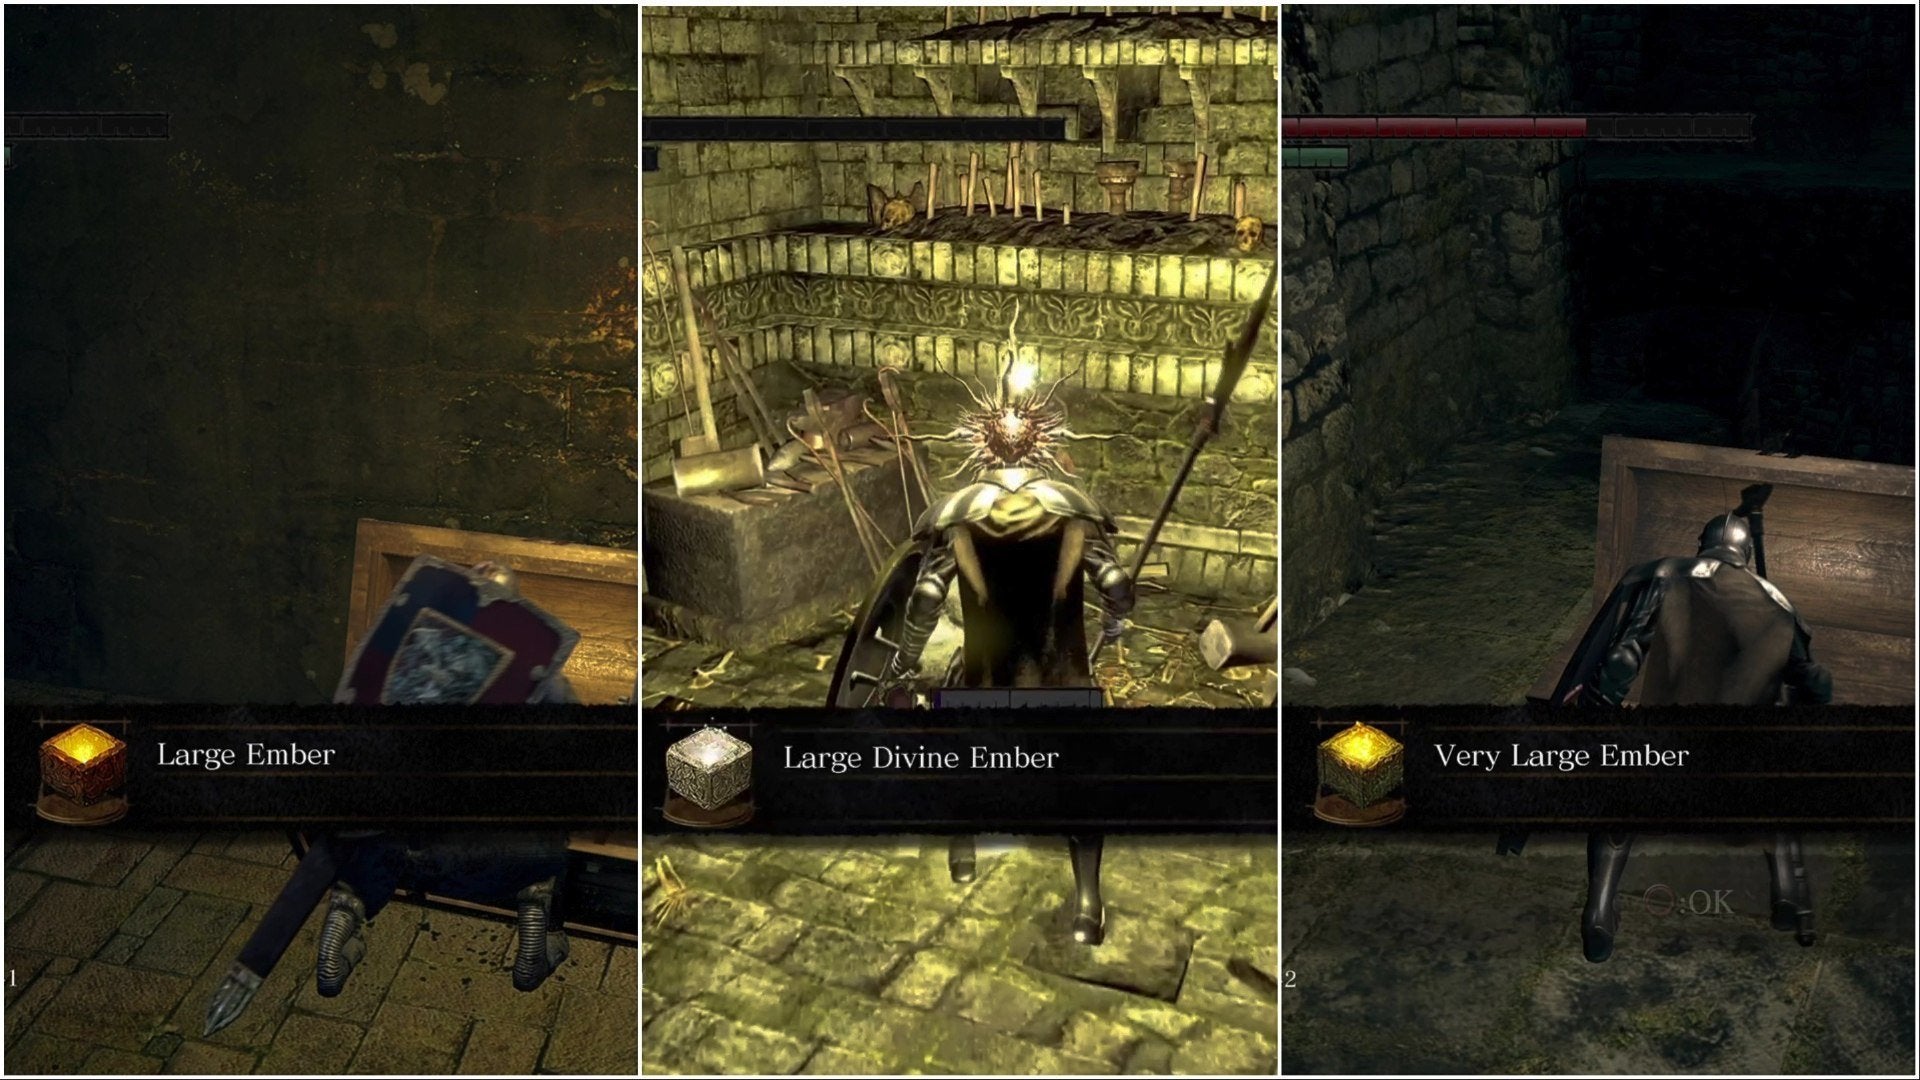 The player picking up Embers from multiple chests in Dark Souls.